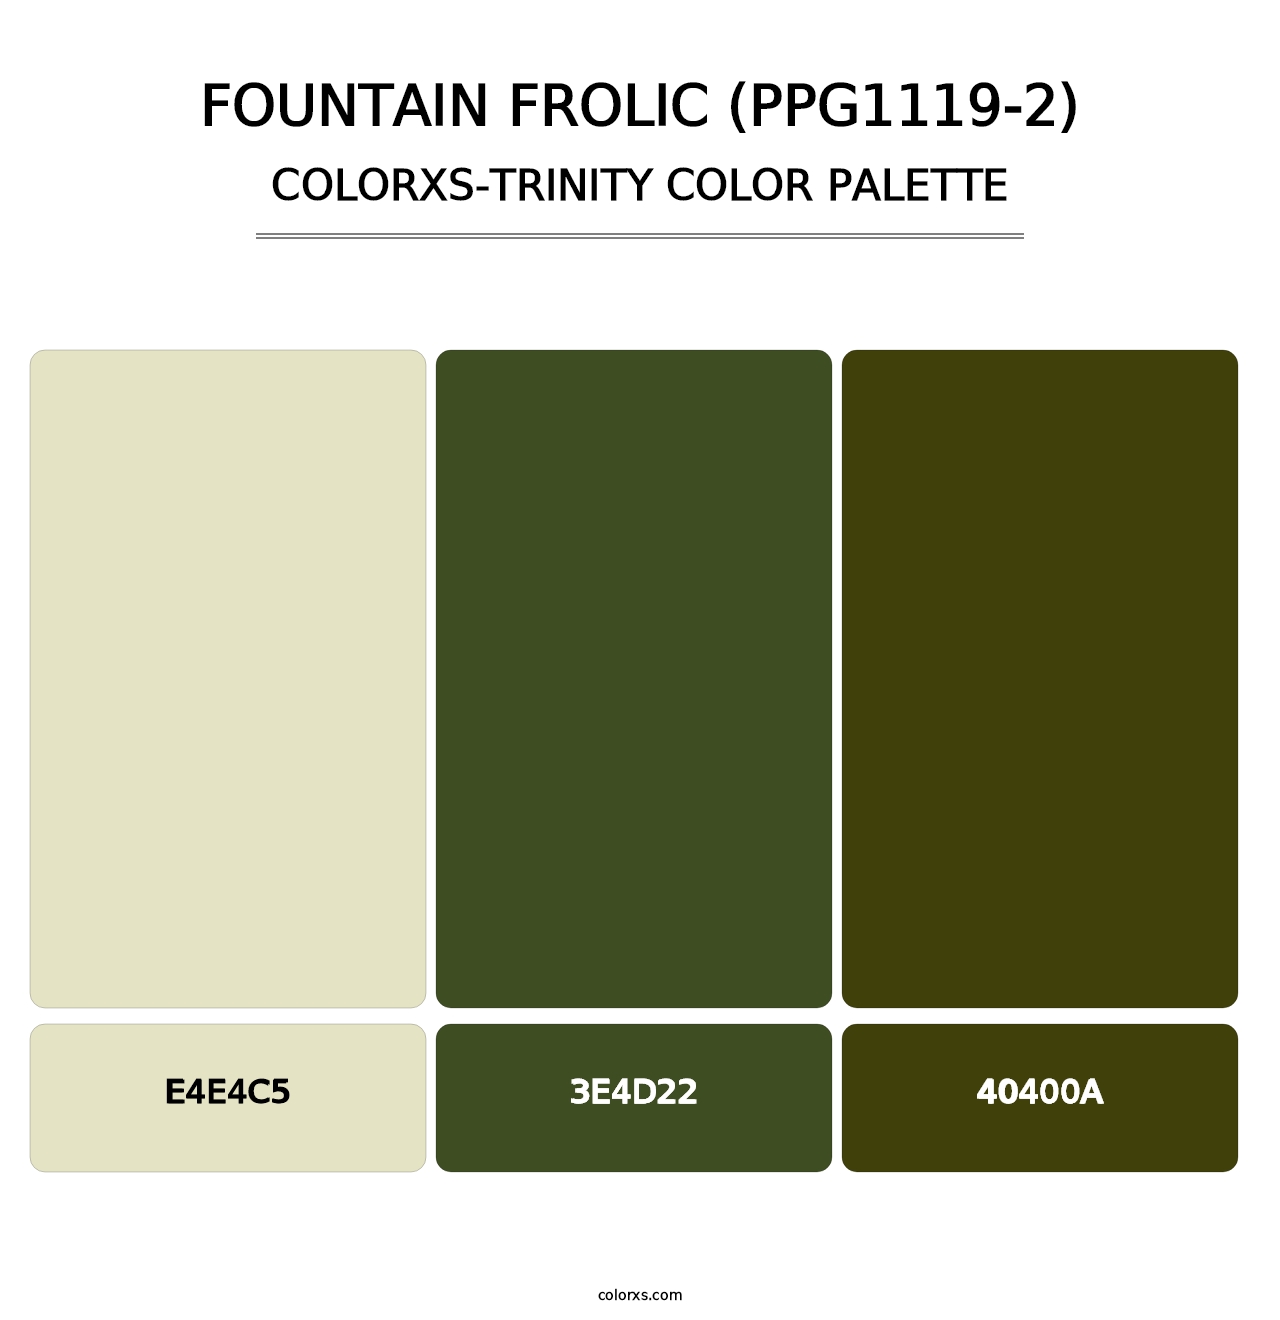 Fountain Frolic (PPG1119-2) - Colorxs Trinity Palette